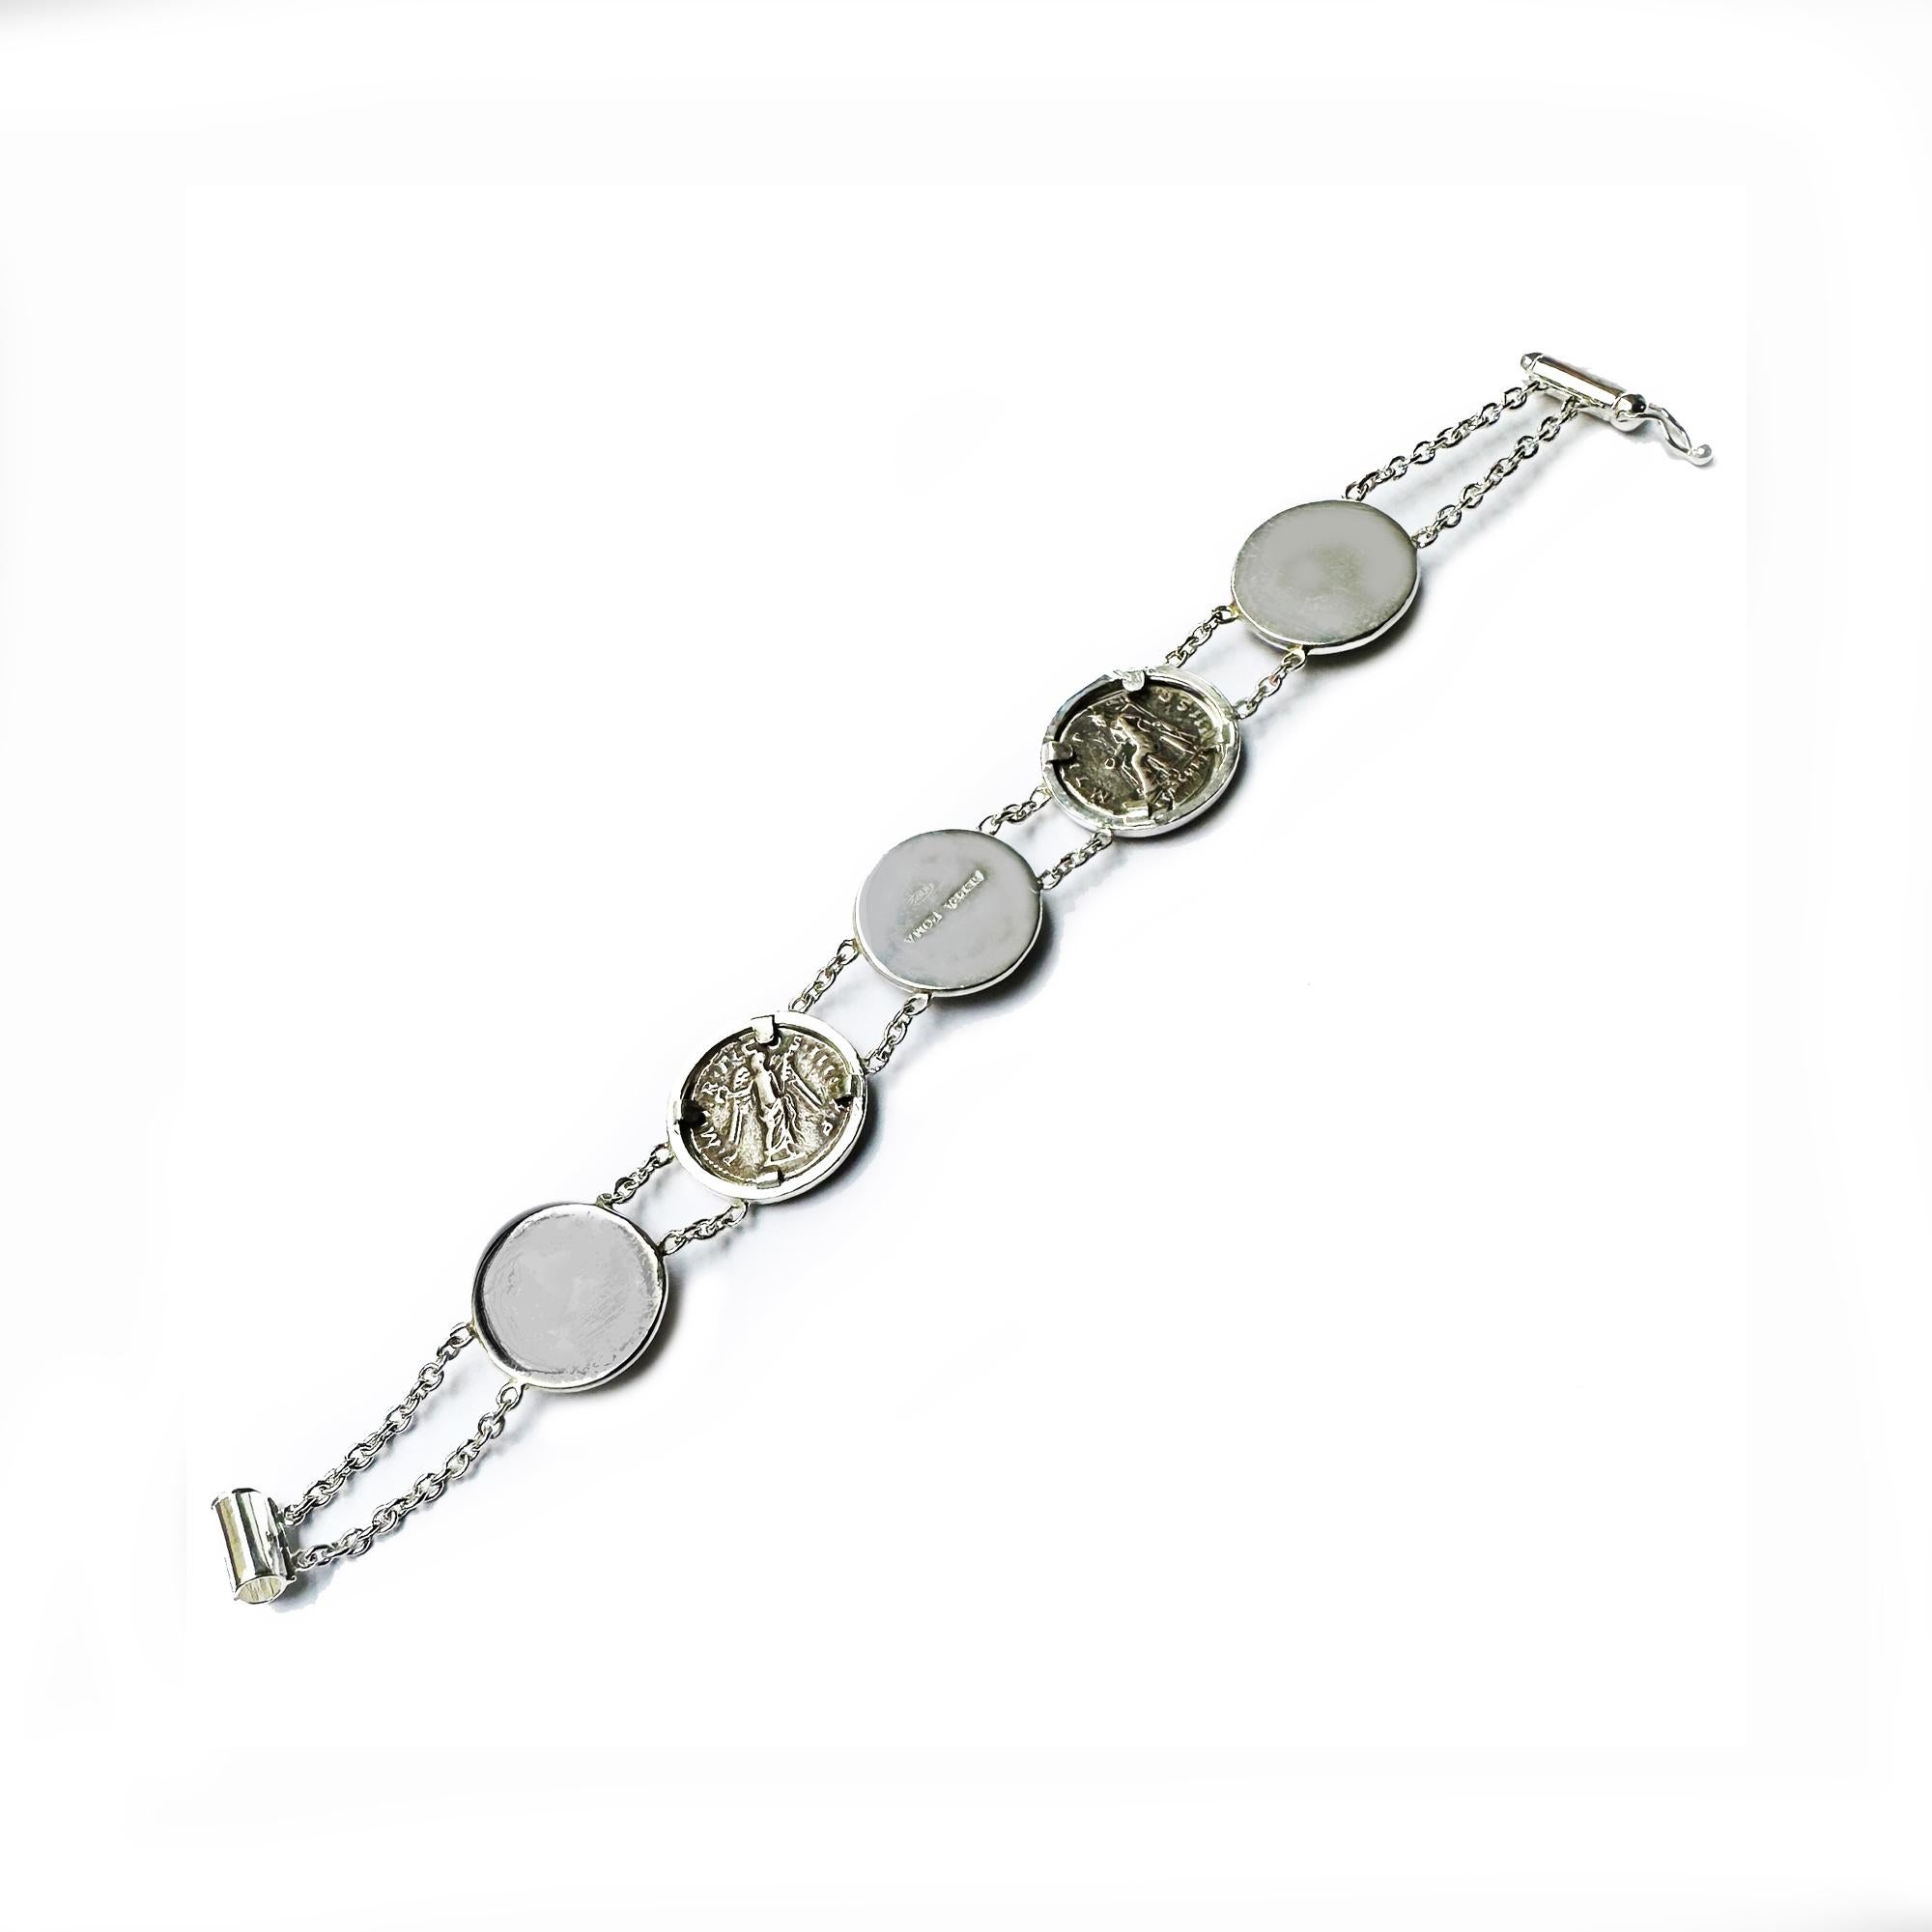 This exquisite sterling silver bracelet features the remarkable addition of two authentic Roman coins from the 2nd century AD, depicting the revered Emperors Hadrian and Trajan. Alongside these ancient coins, the bracelet showcases the timeless